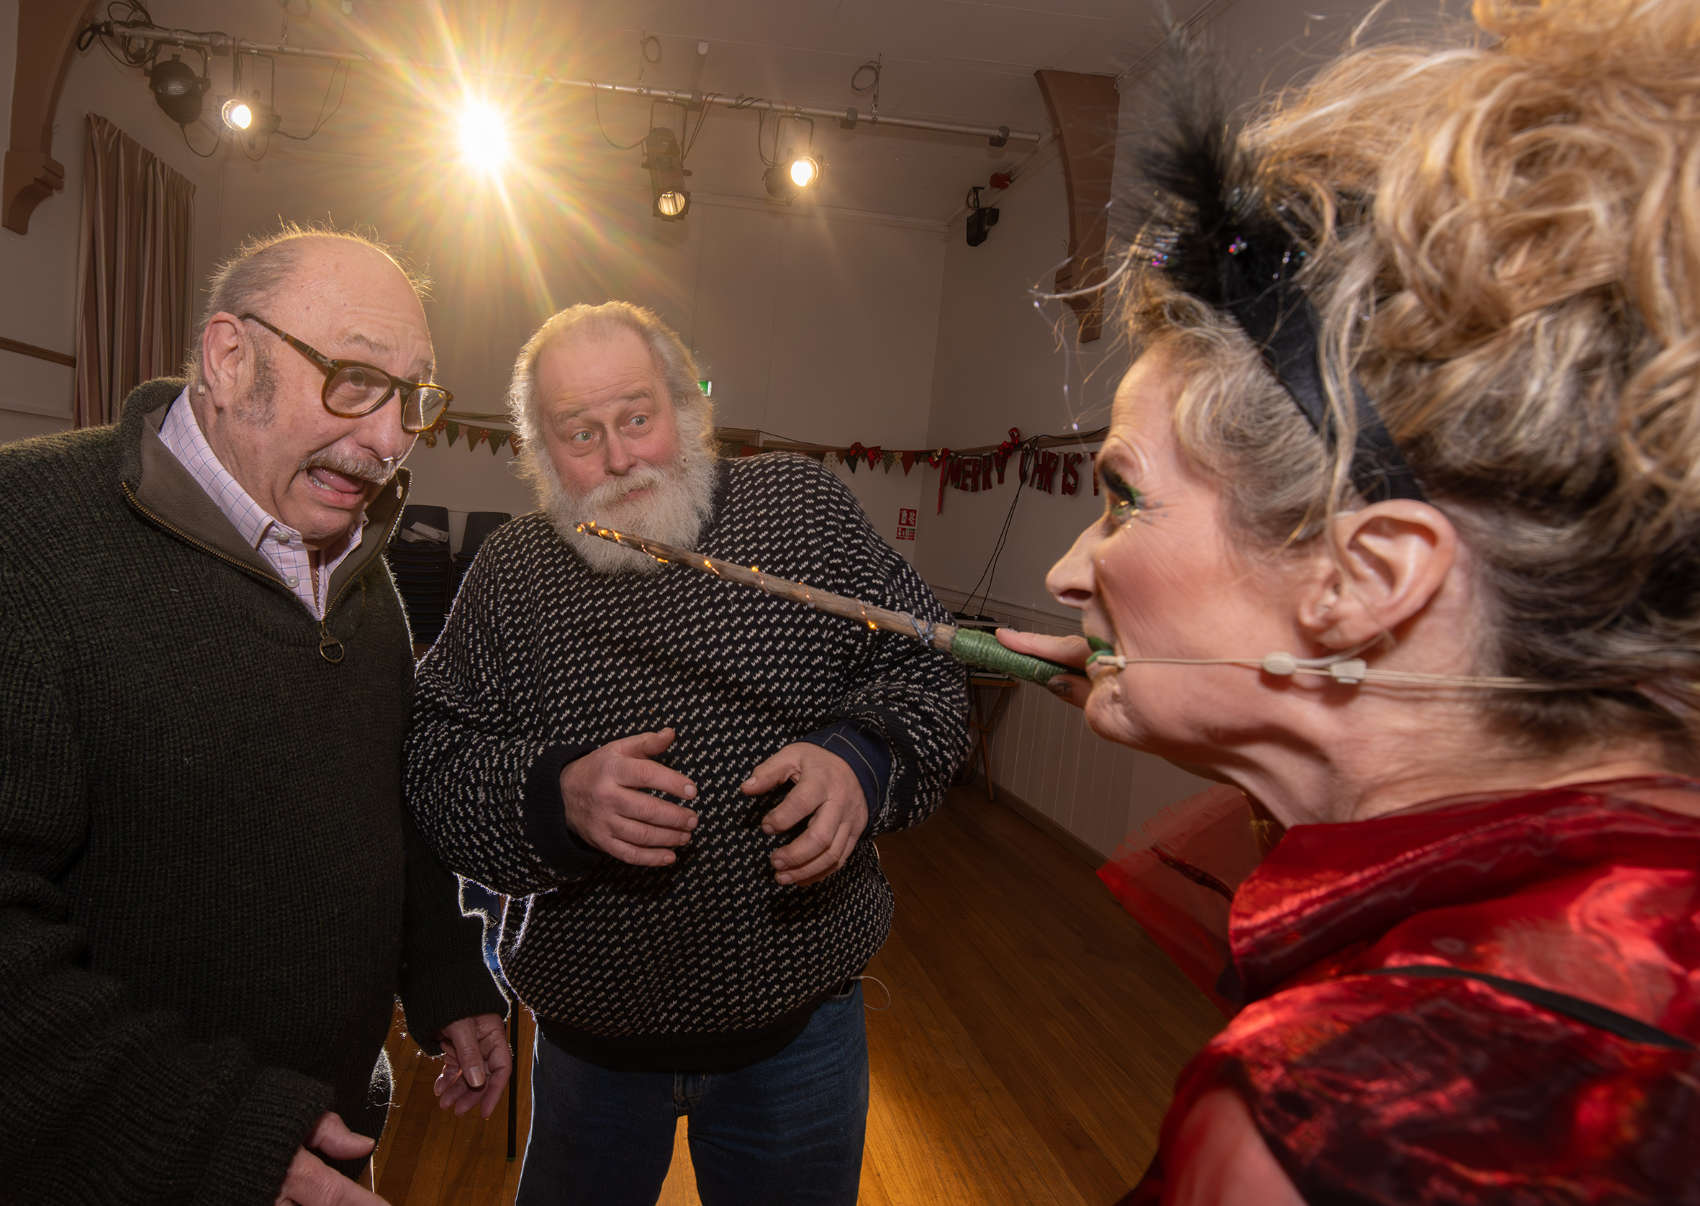 Karen Coombes as Wanda the Wicked puts a spell on Cllr Andy Paraskos and Cllr Arnold Warneken